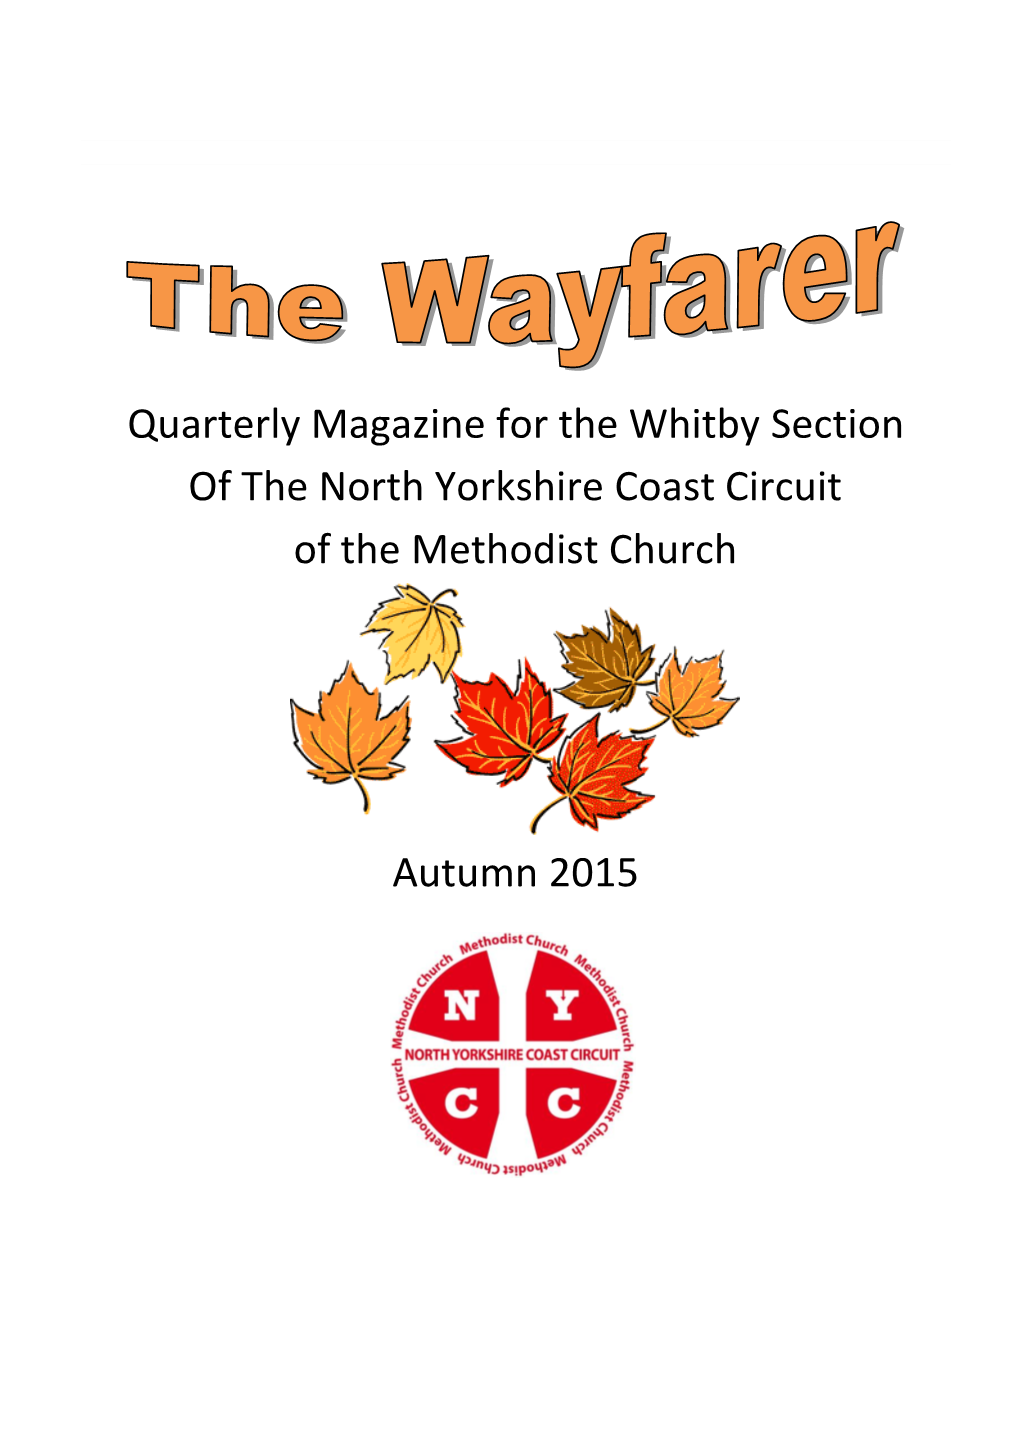 Quarterly Magazine for the Whitby Section of the North Yorkshire Coast Circuit of the Methodist Church